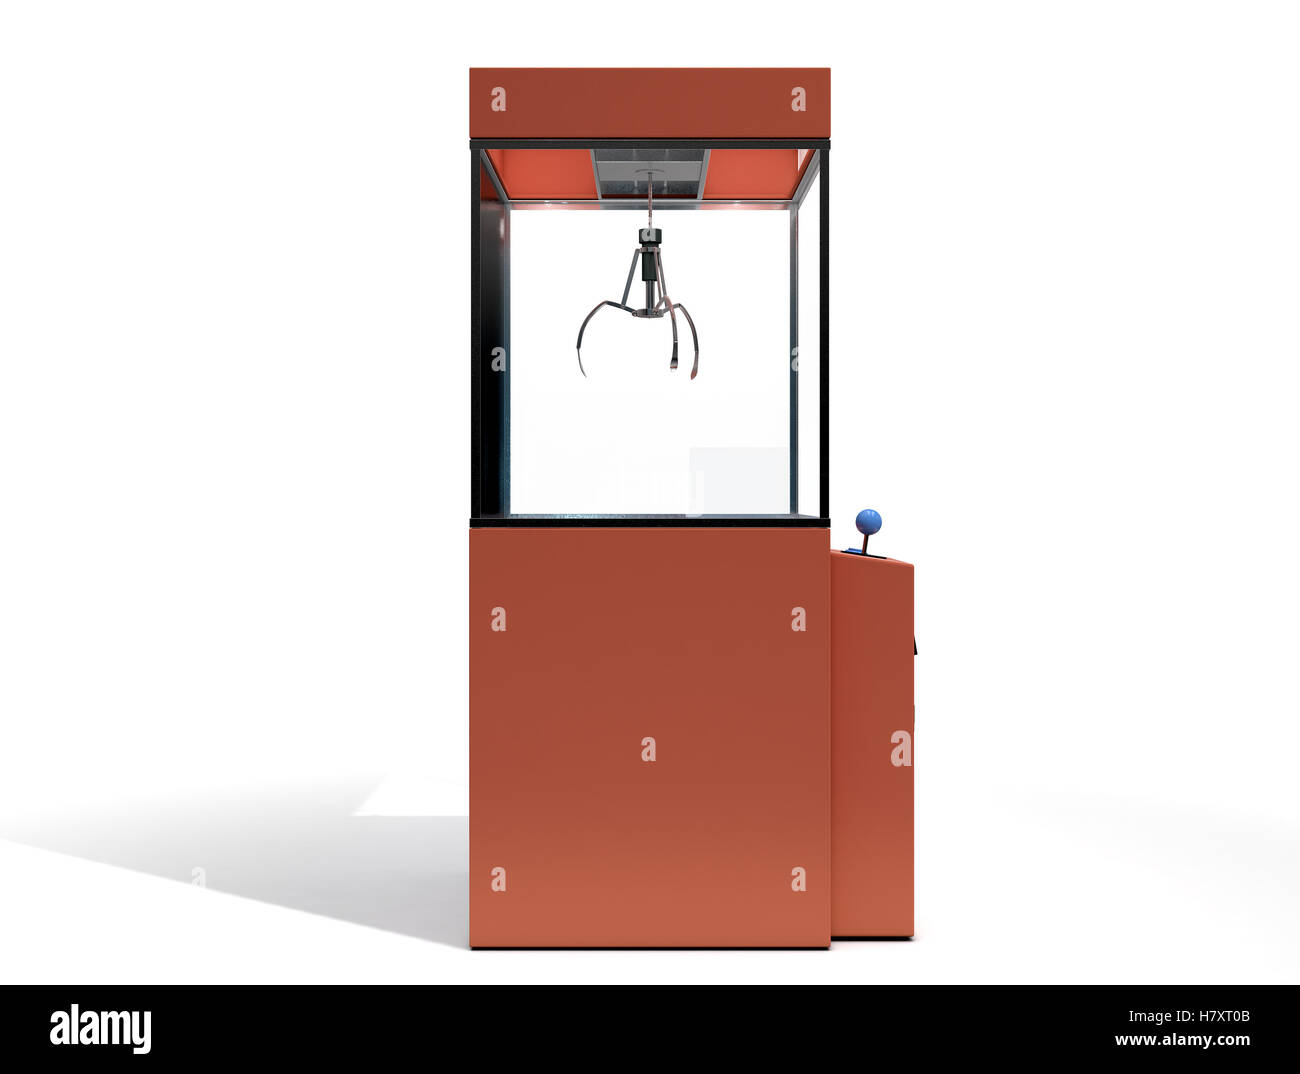 A 3D render of an empty arcade type claw grabber game on an isolated white background Stock Photo